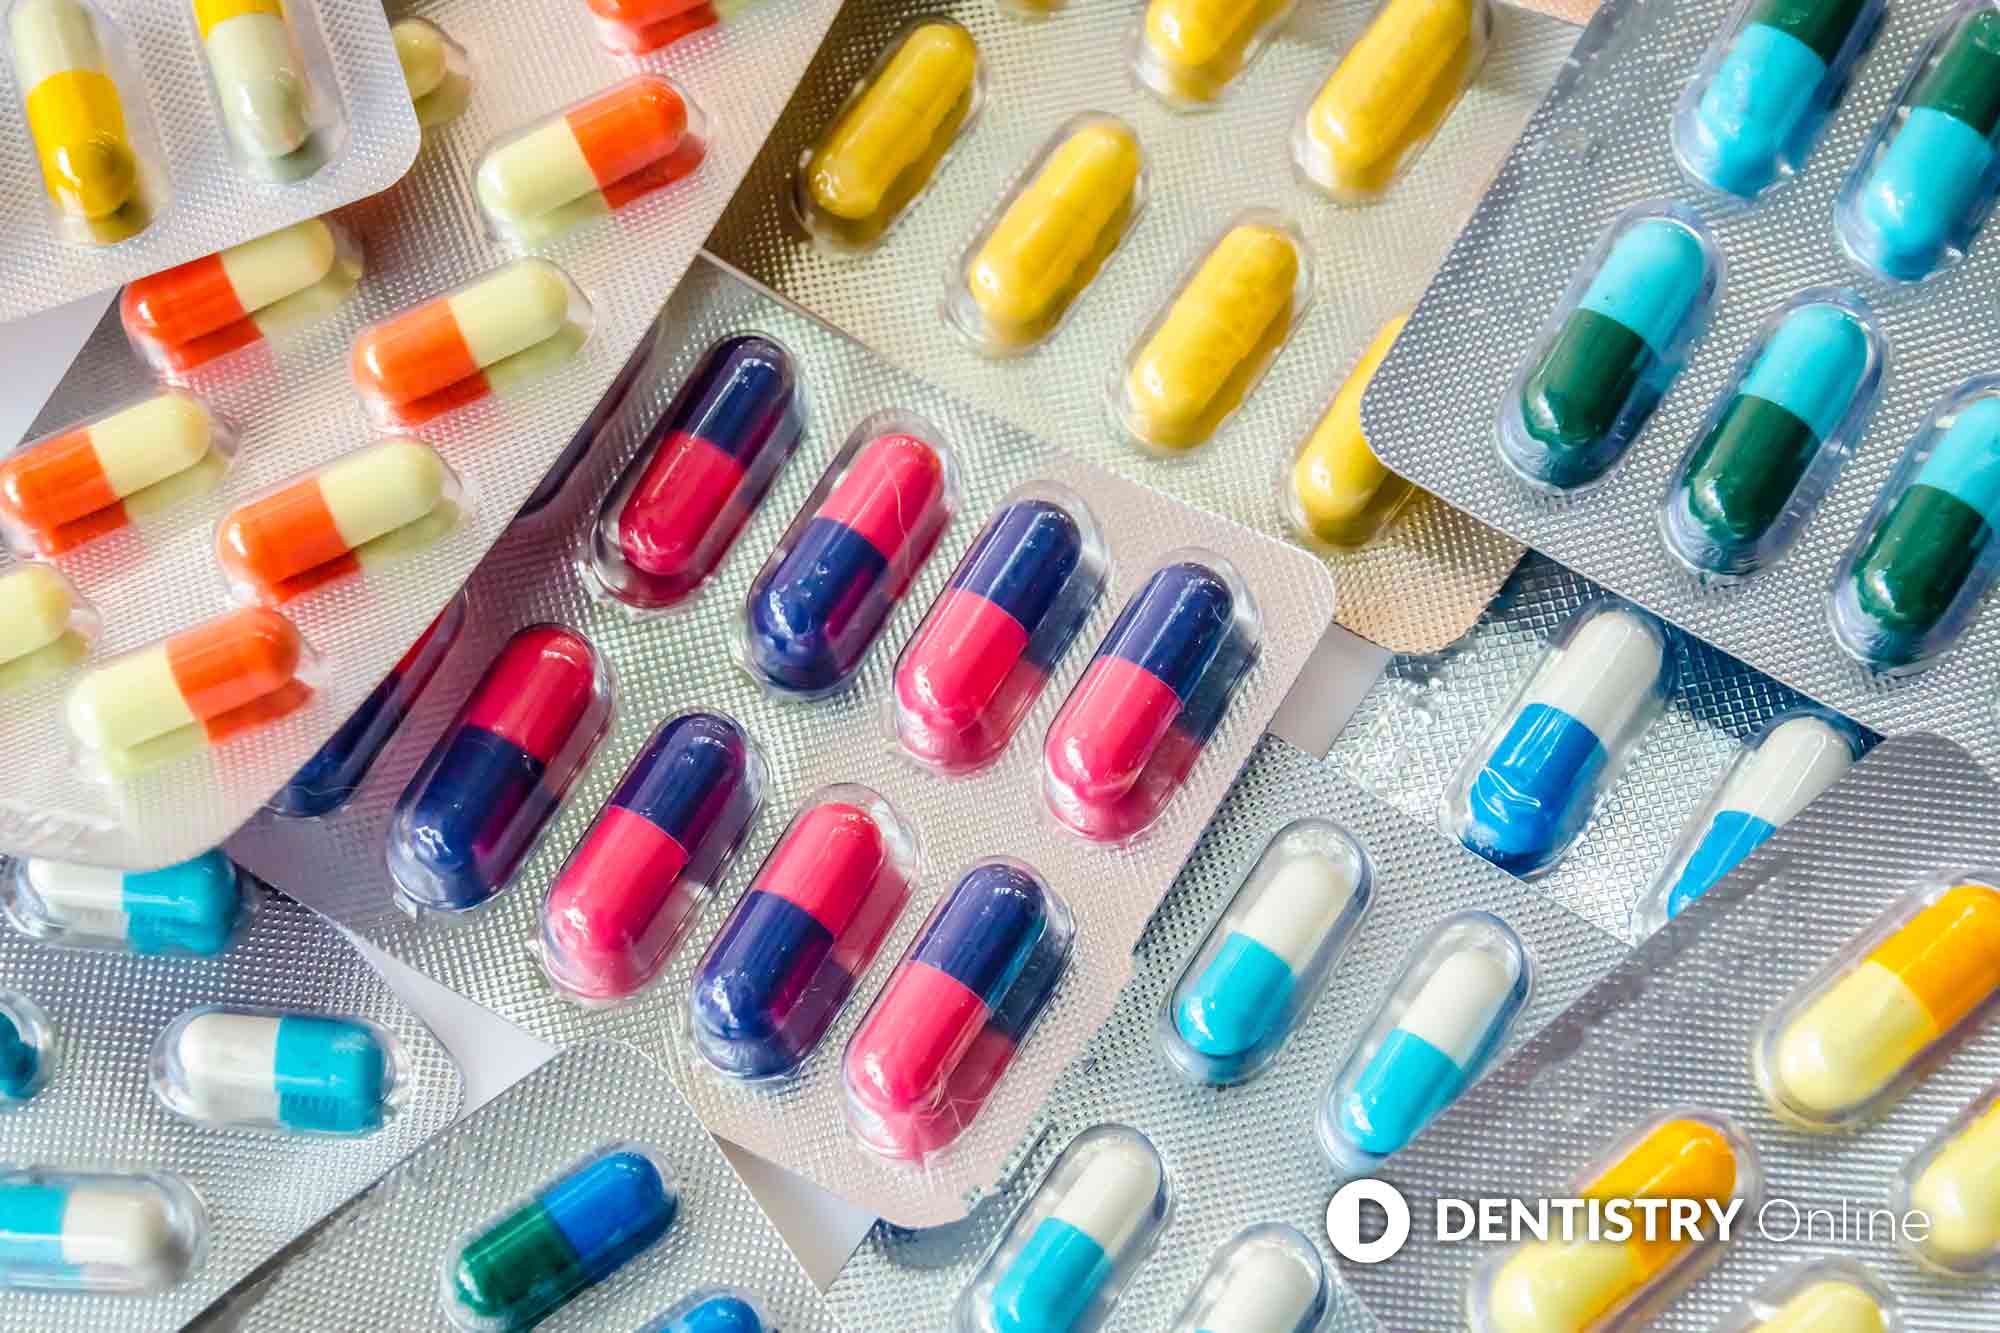 There has been a rise in the number of antibiotics prescribed to dental patients, a study has revealed